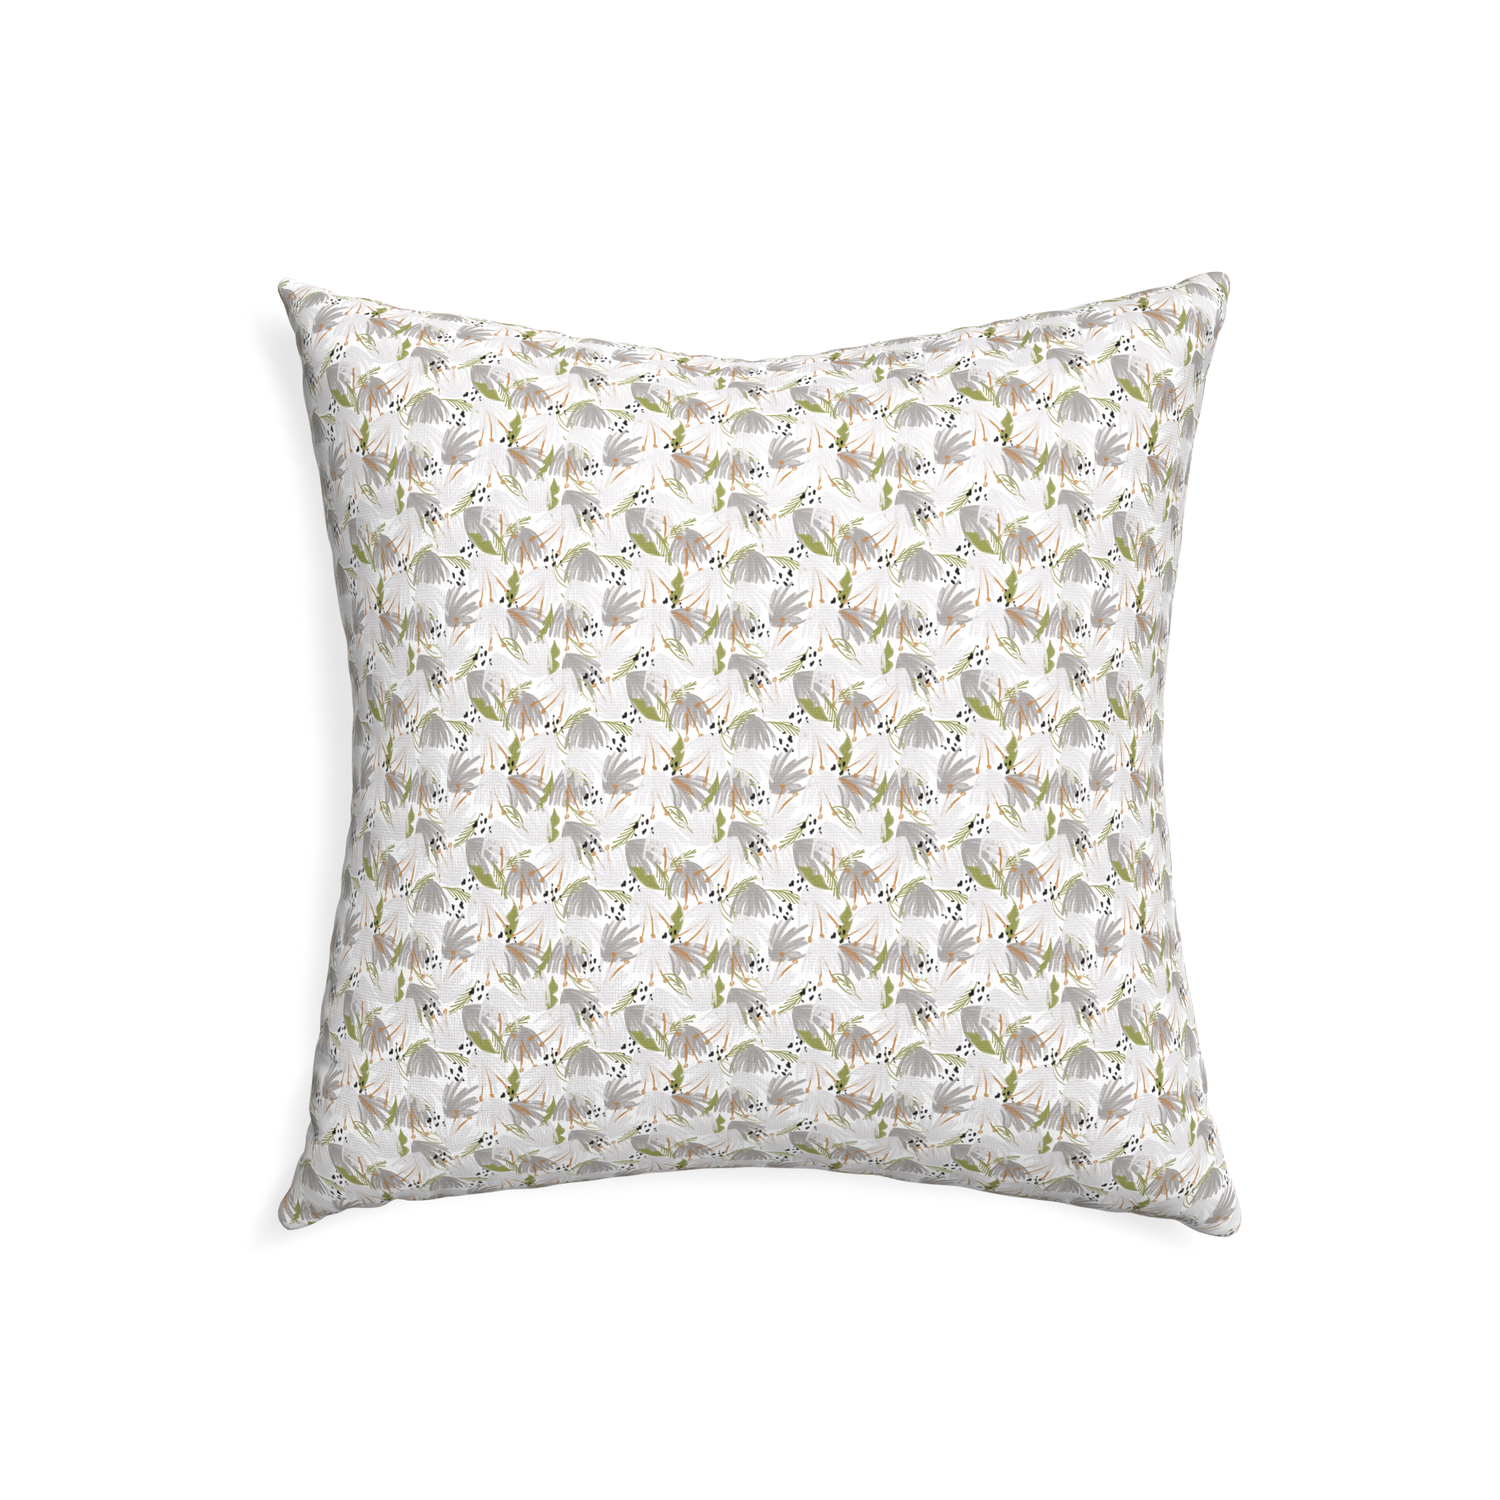 22-square eden grey custom pillow with none on white background